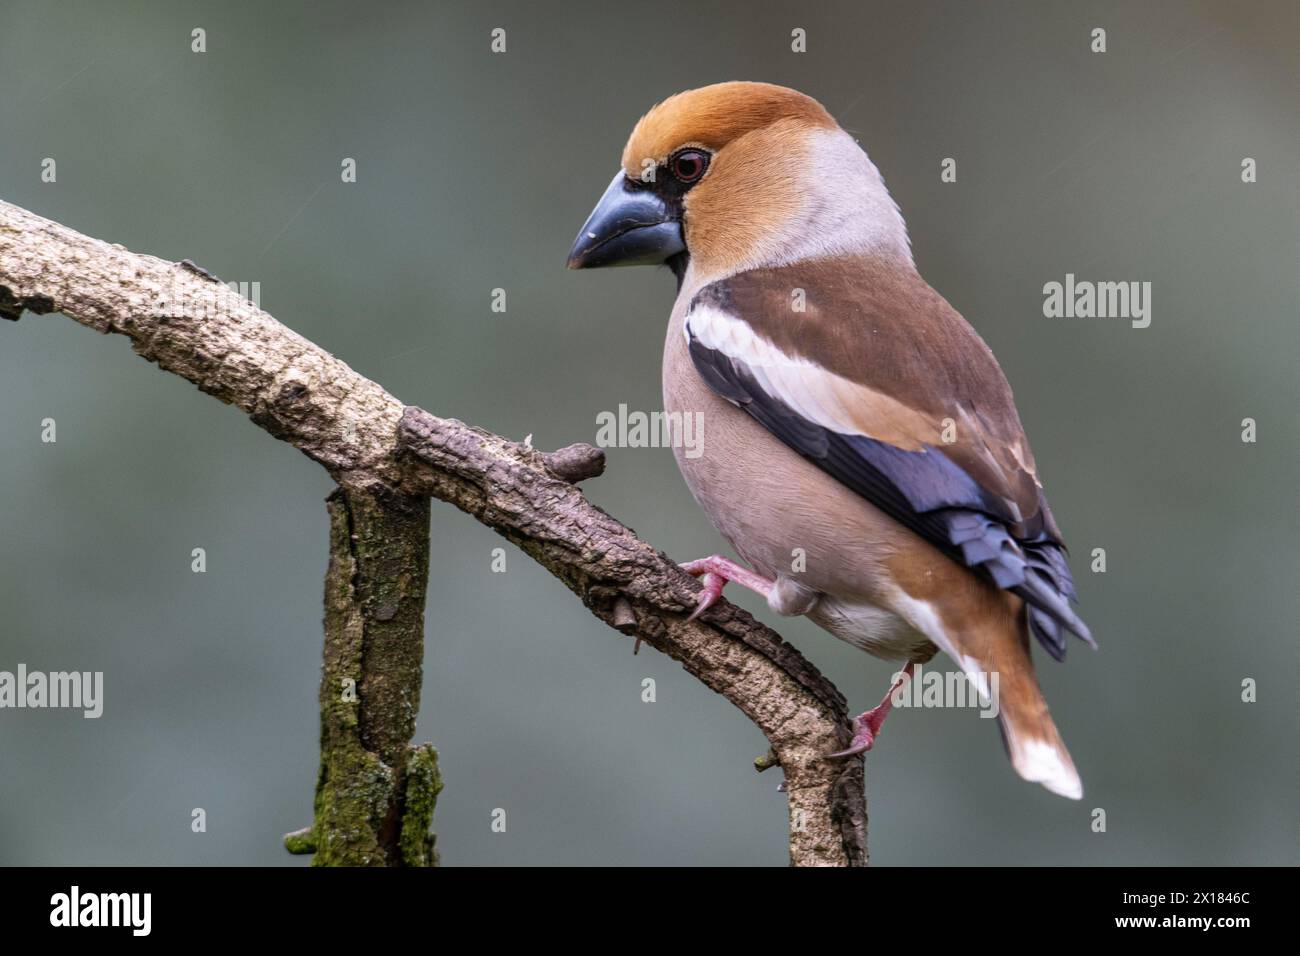 Hawfinch (Coccothraustes coccothraustes), Emsland, Lower Saxony, Germany Stock Photo